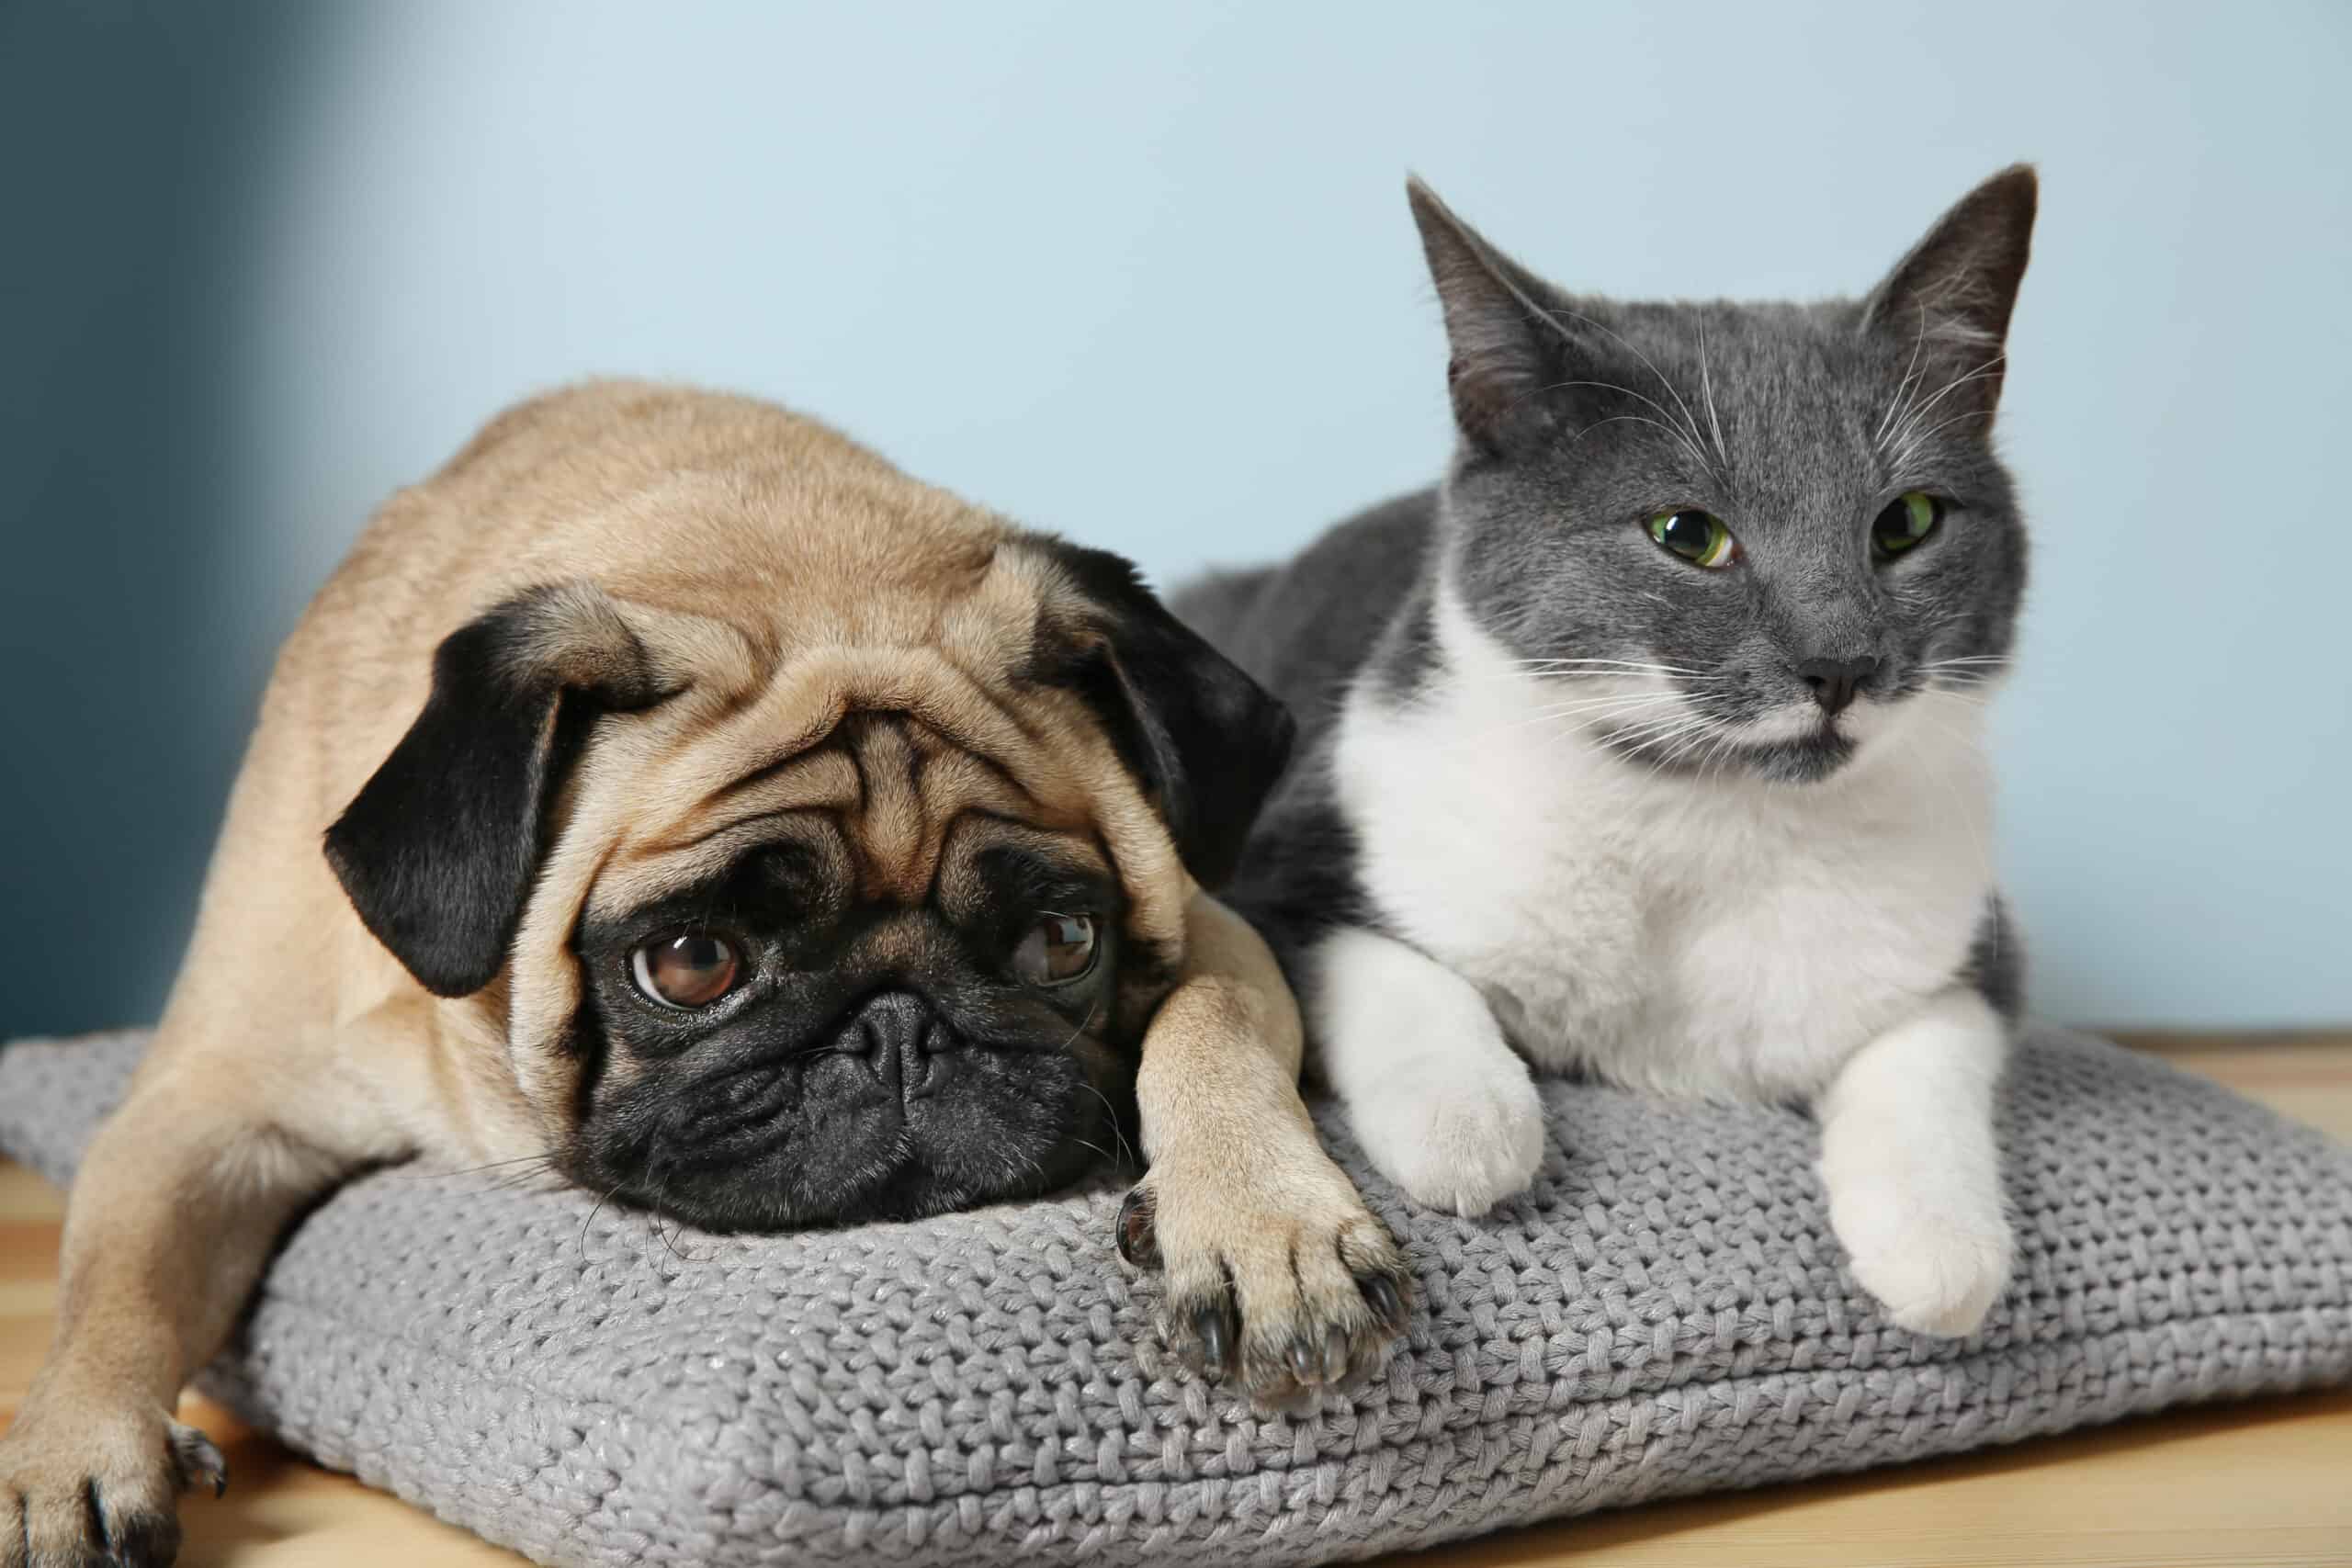 Pet Boarding Vs. Pet Sitting: Which Is Right For Your Animal Companion?